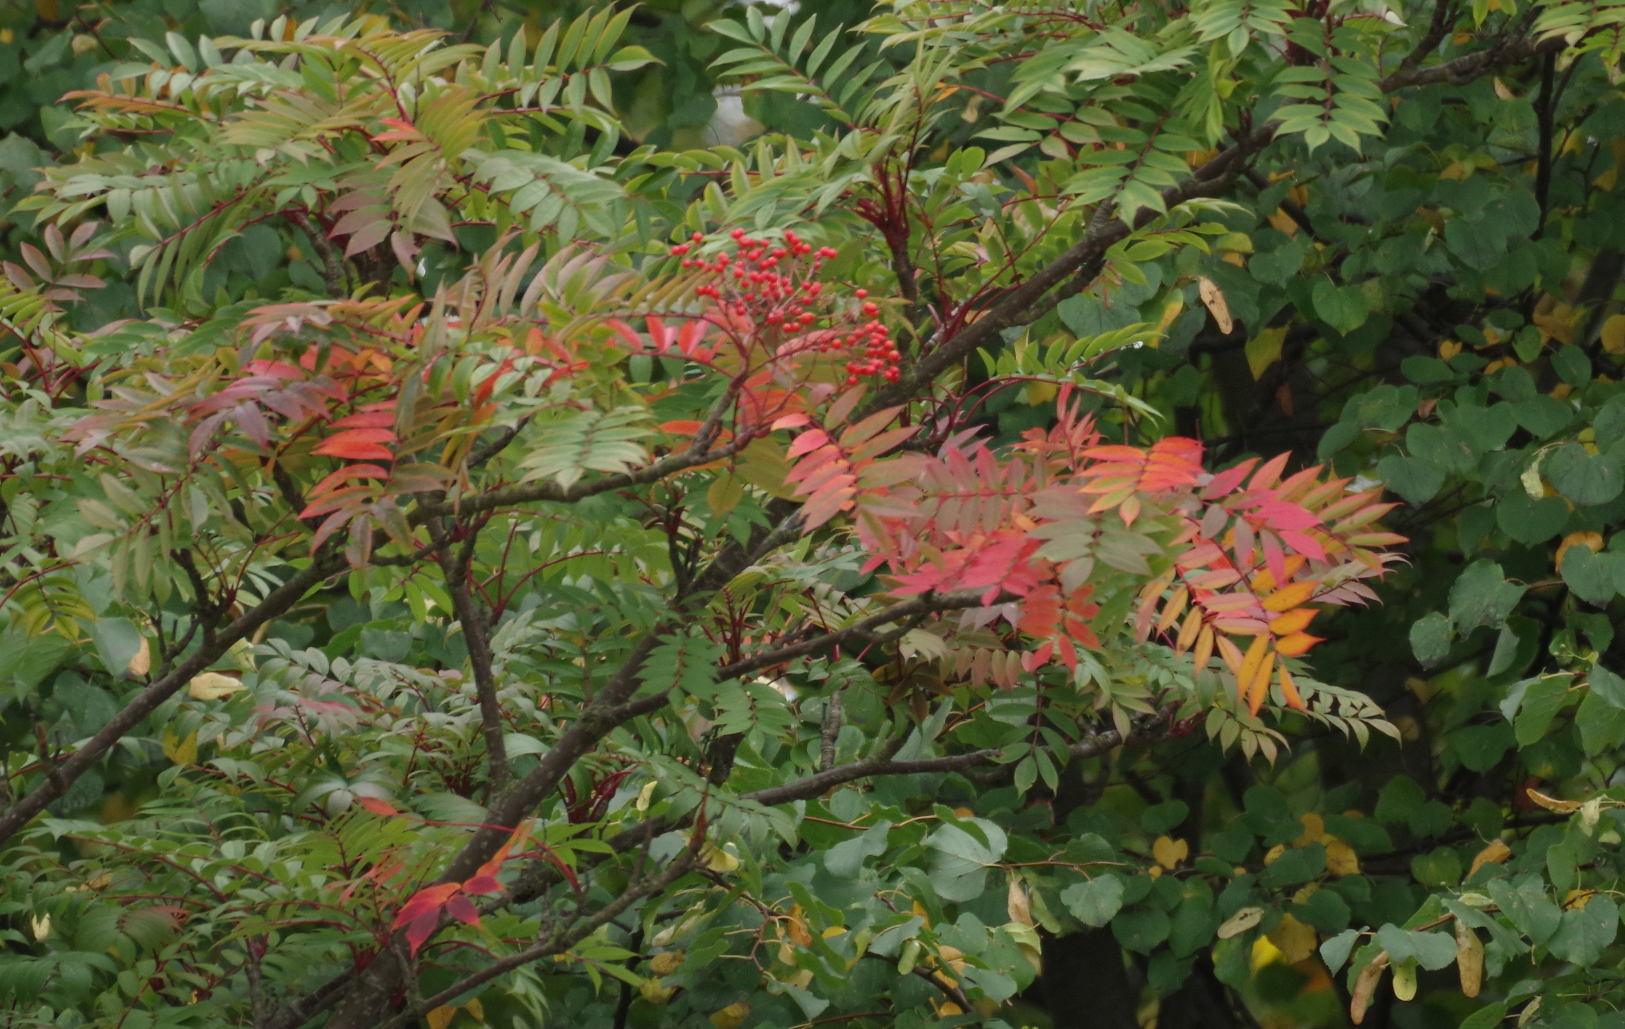 Leaves Turning Red